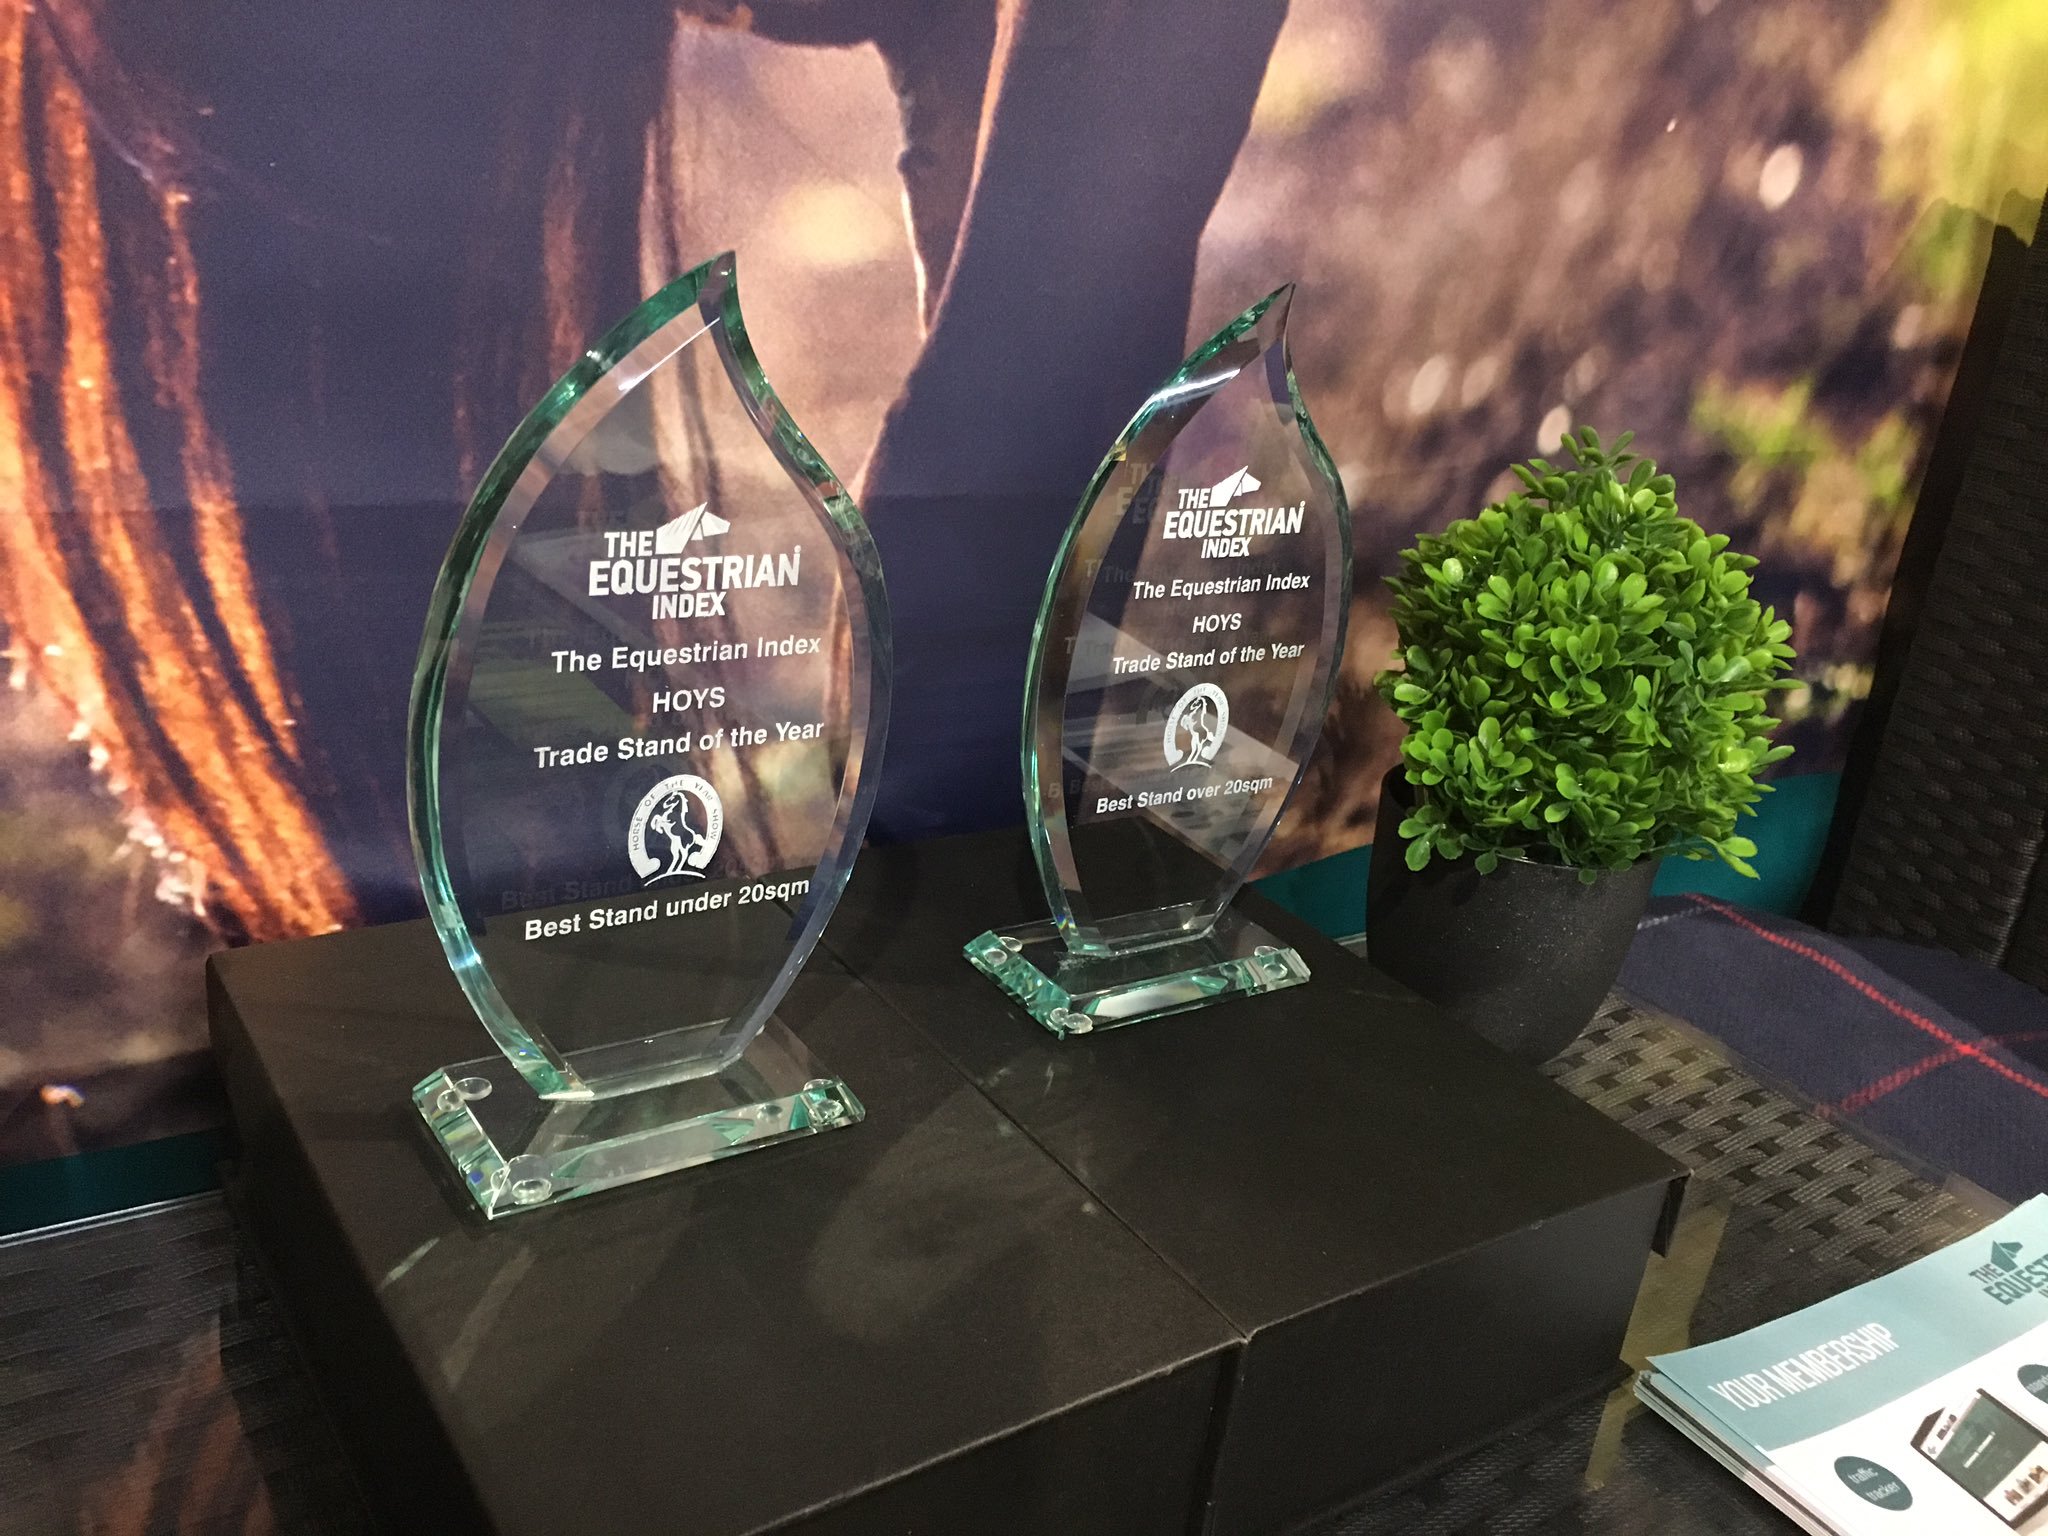 the equestrian index HOYS trade stand of the year awards